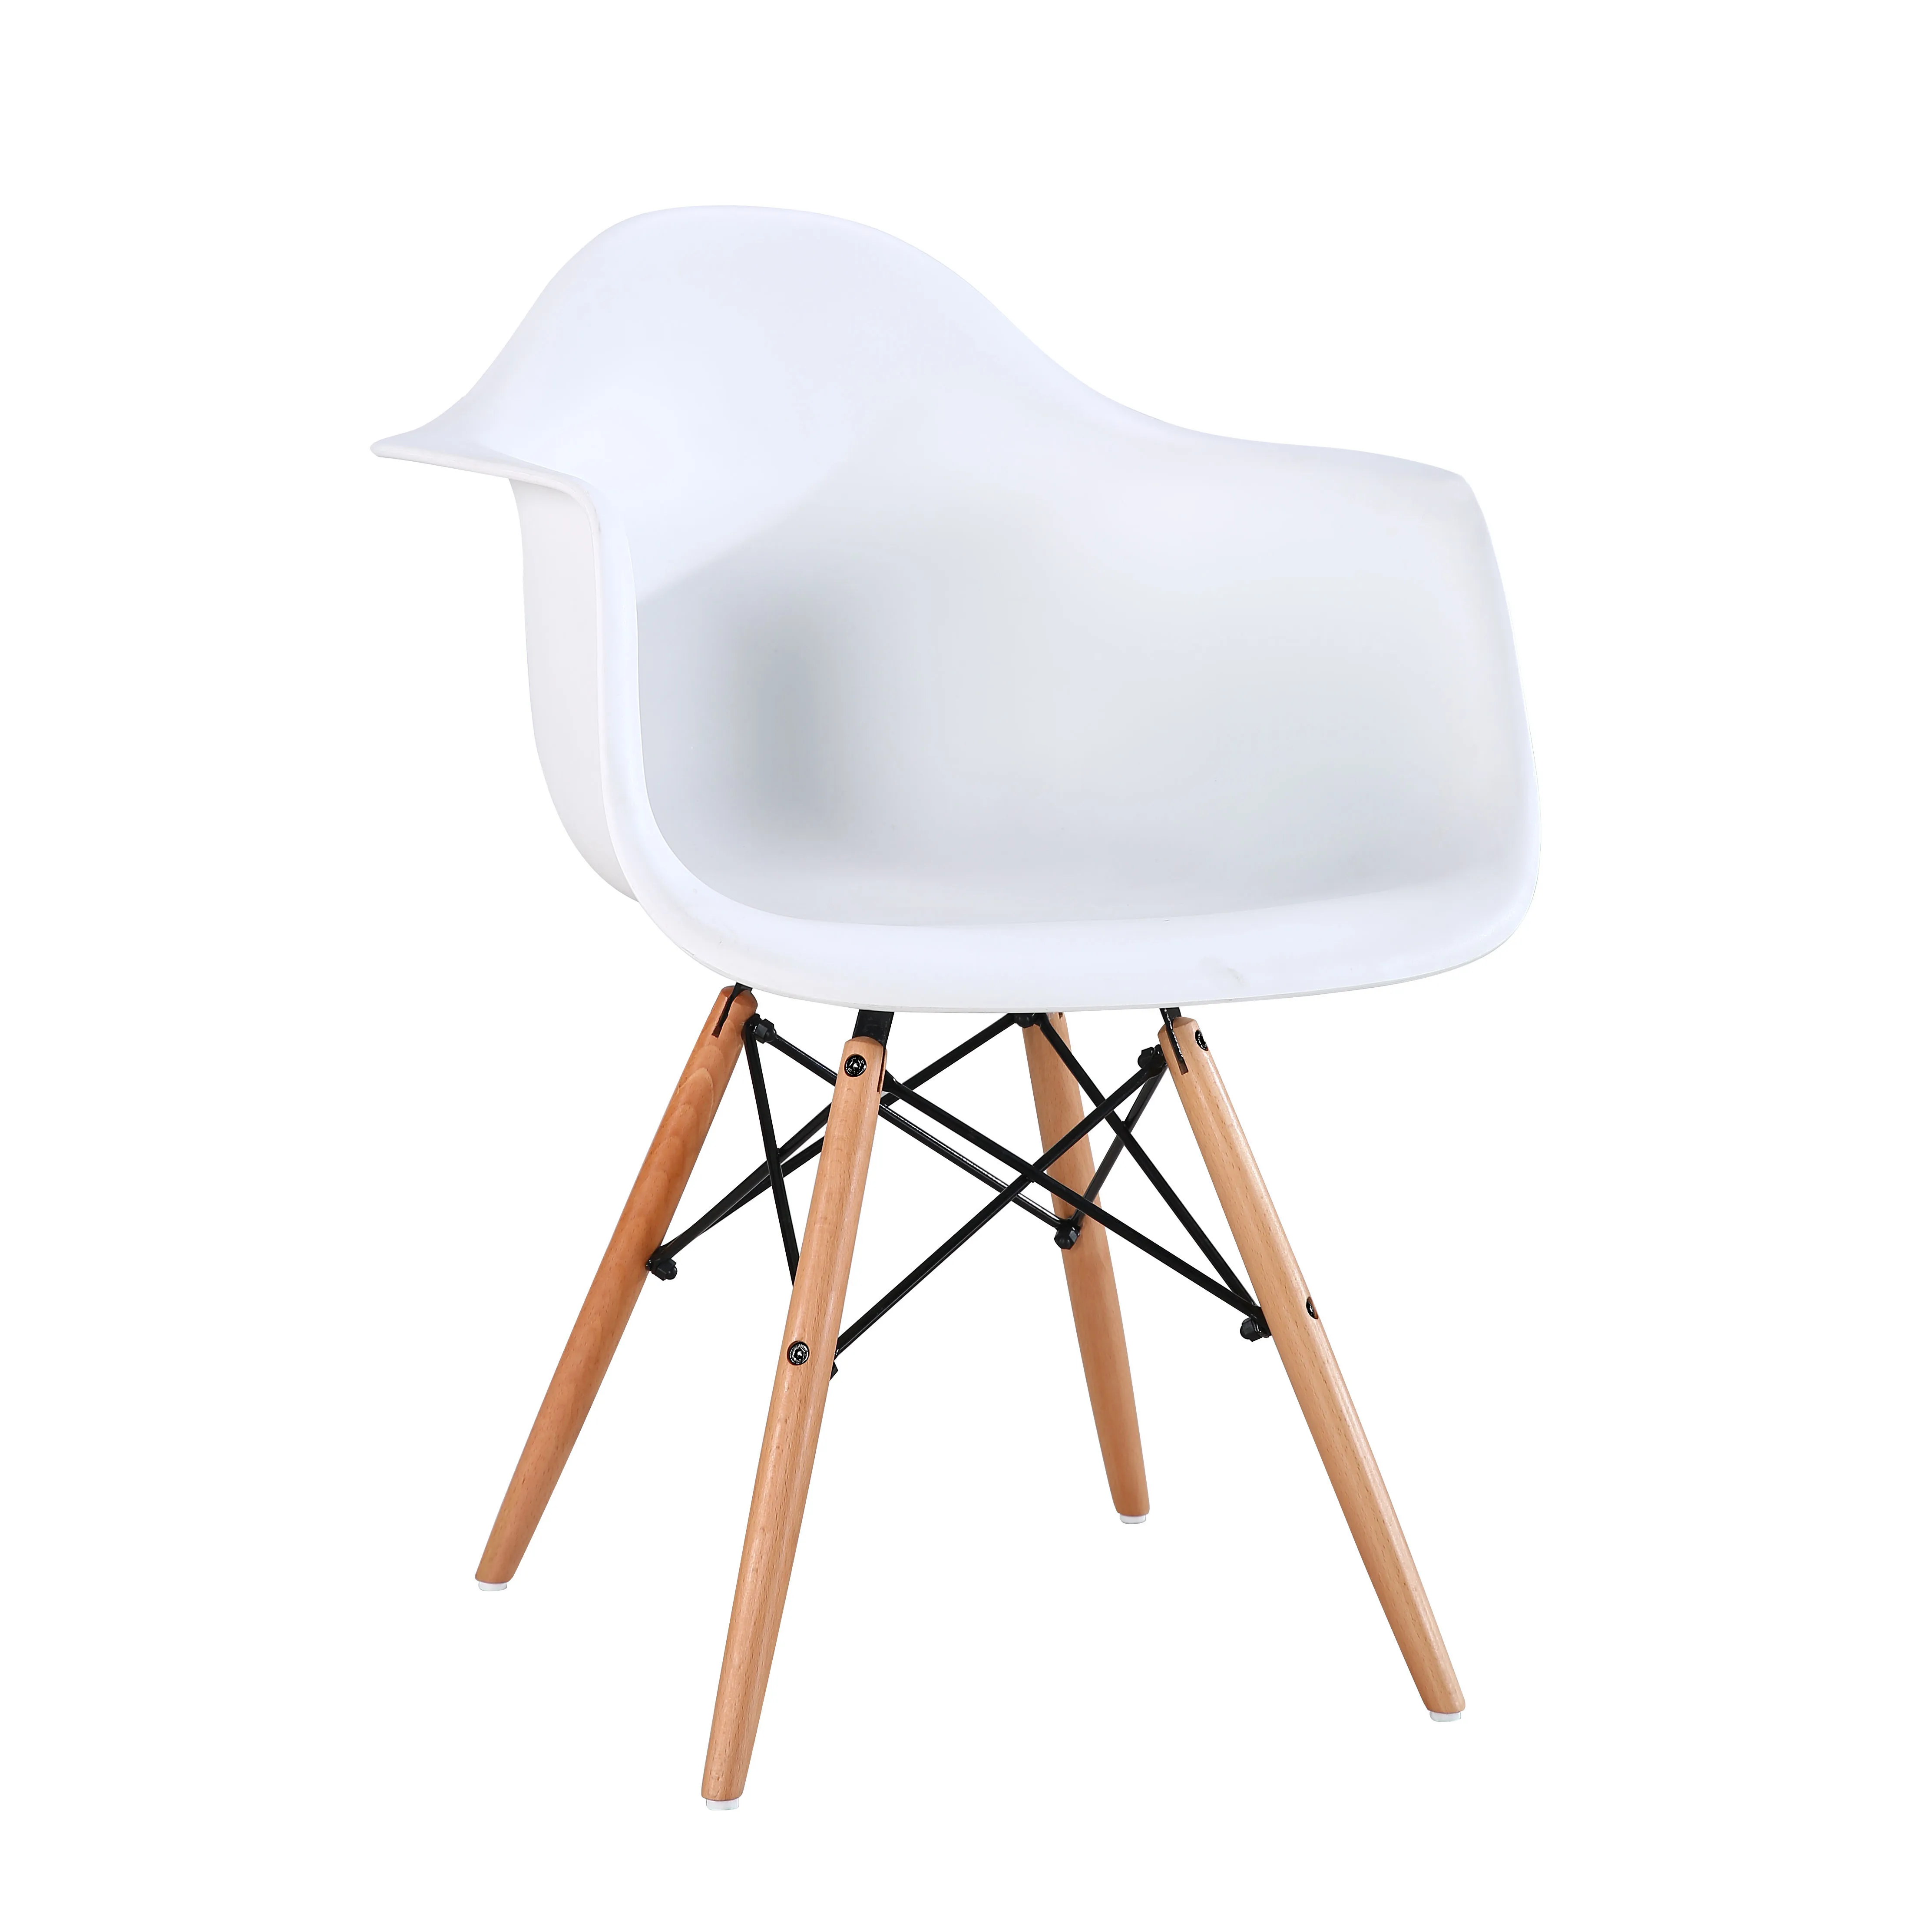 Cheap Modern Pp Garden Armchair Armed White Outdoor Plastic Shell Design Dining Room Chairs Weight Buy Armed Plastic Dining Chairs With Beech Wood Legs